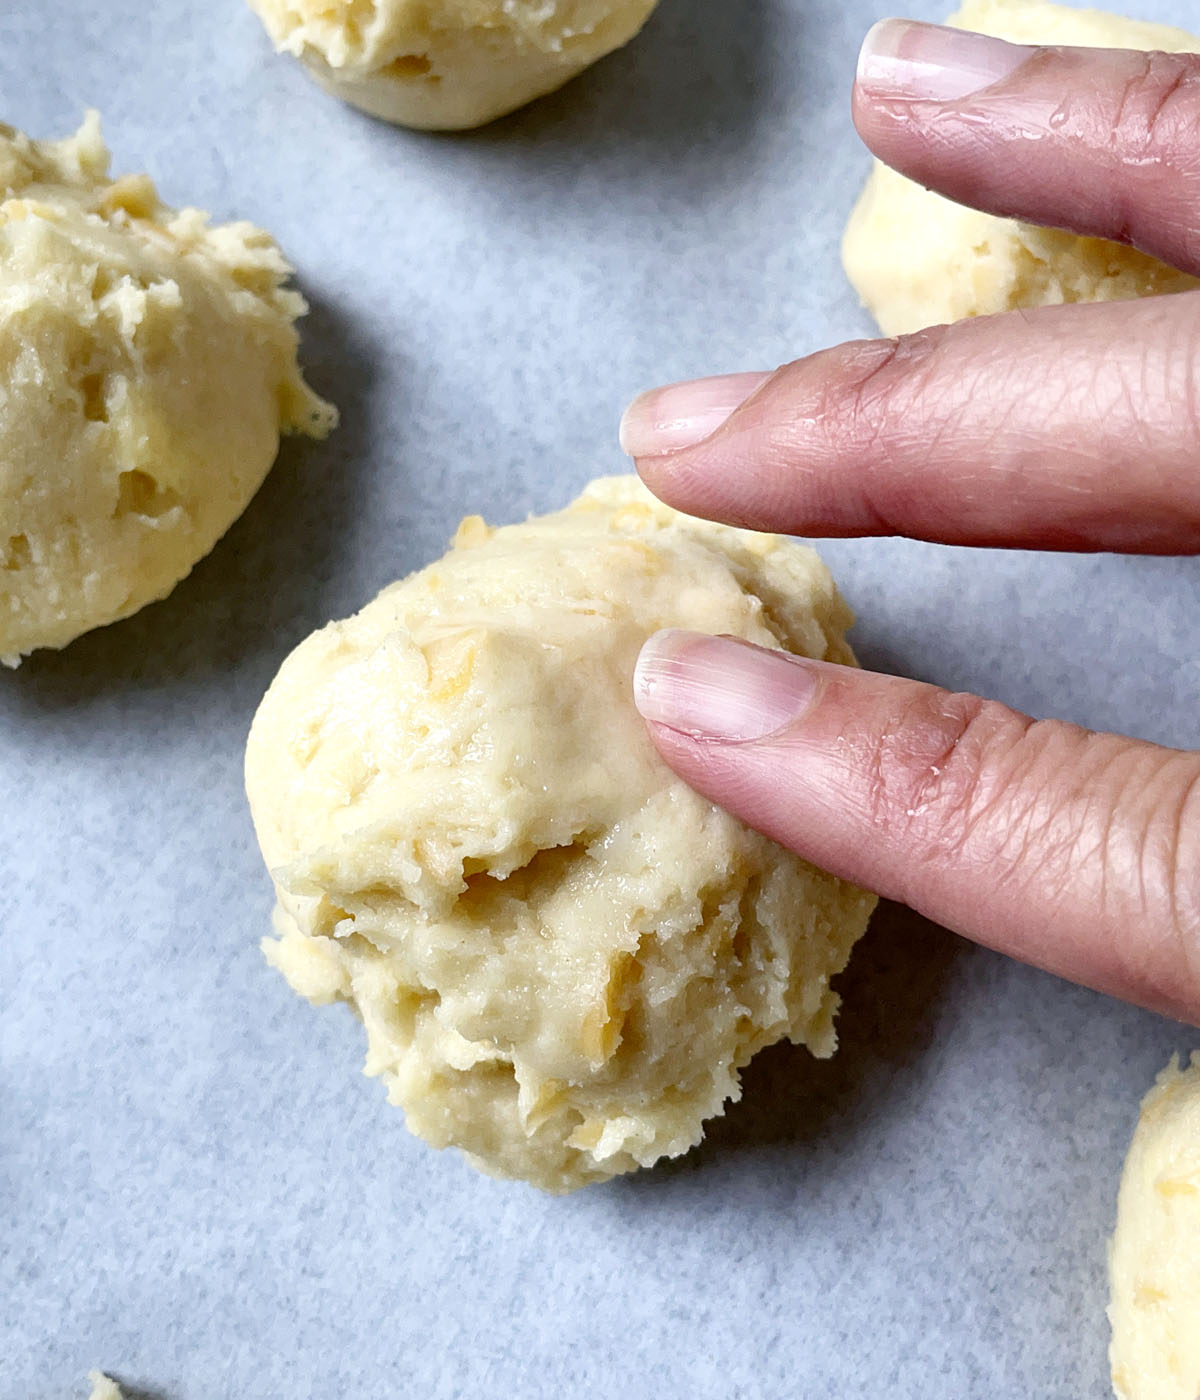 Fingers pressing down on the jagged edges of scoops of dough on white parchment paper.